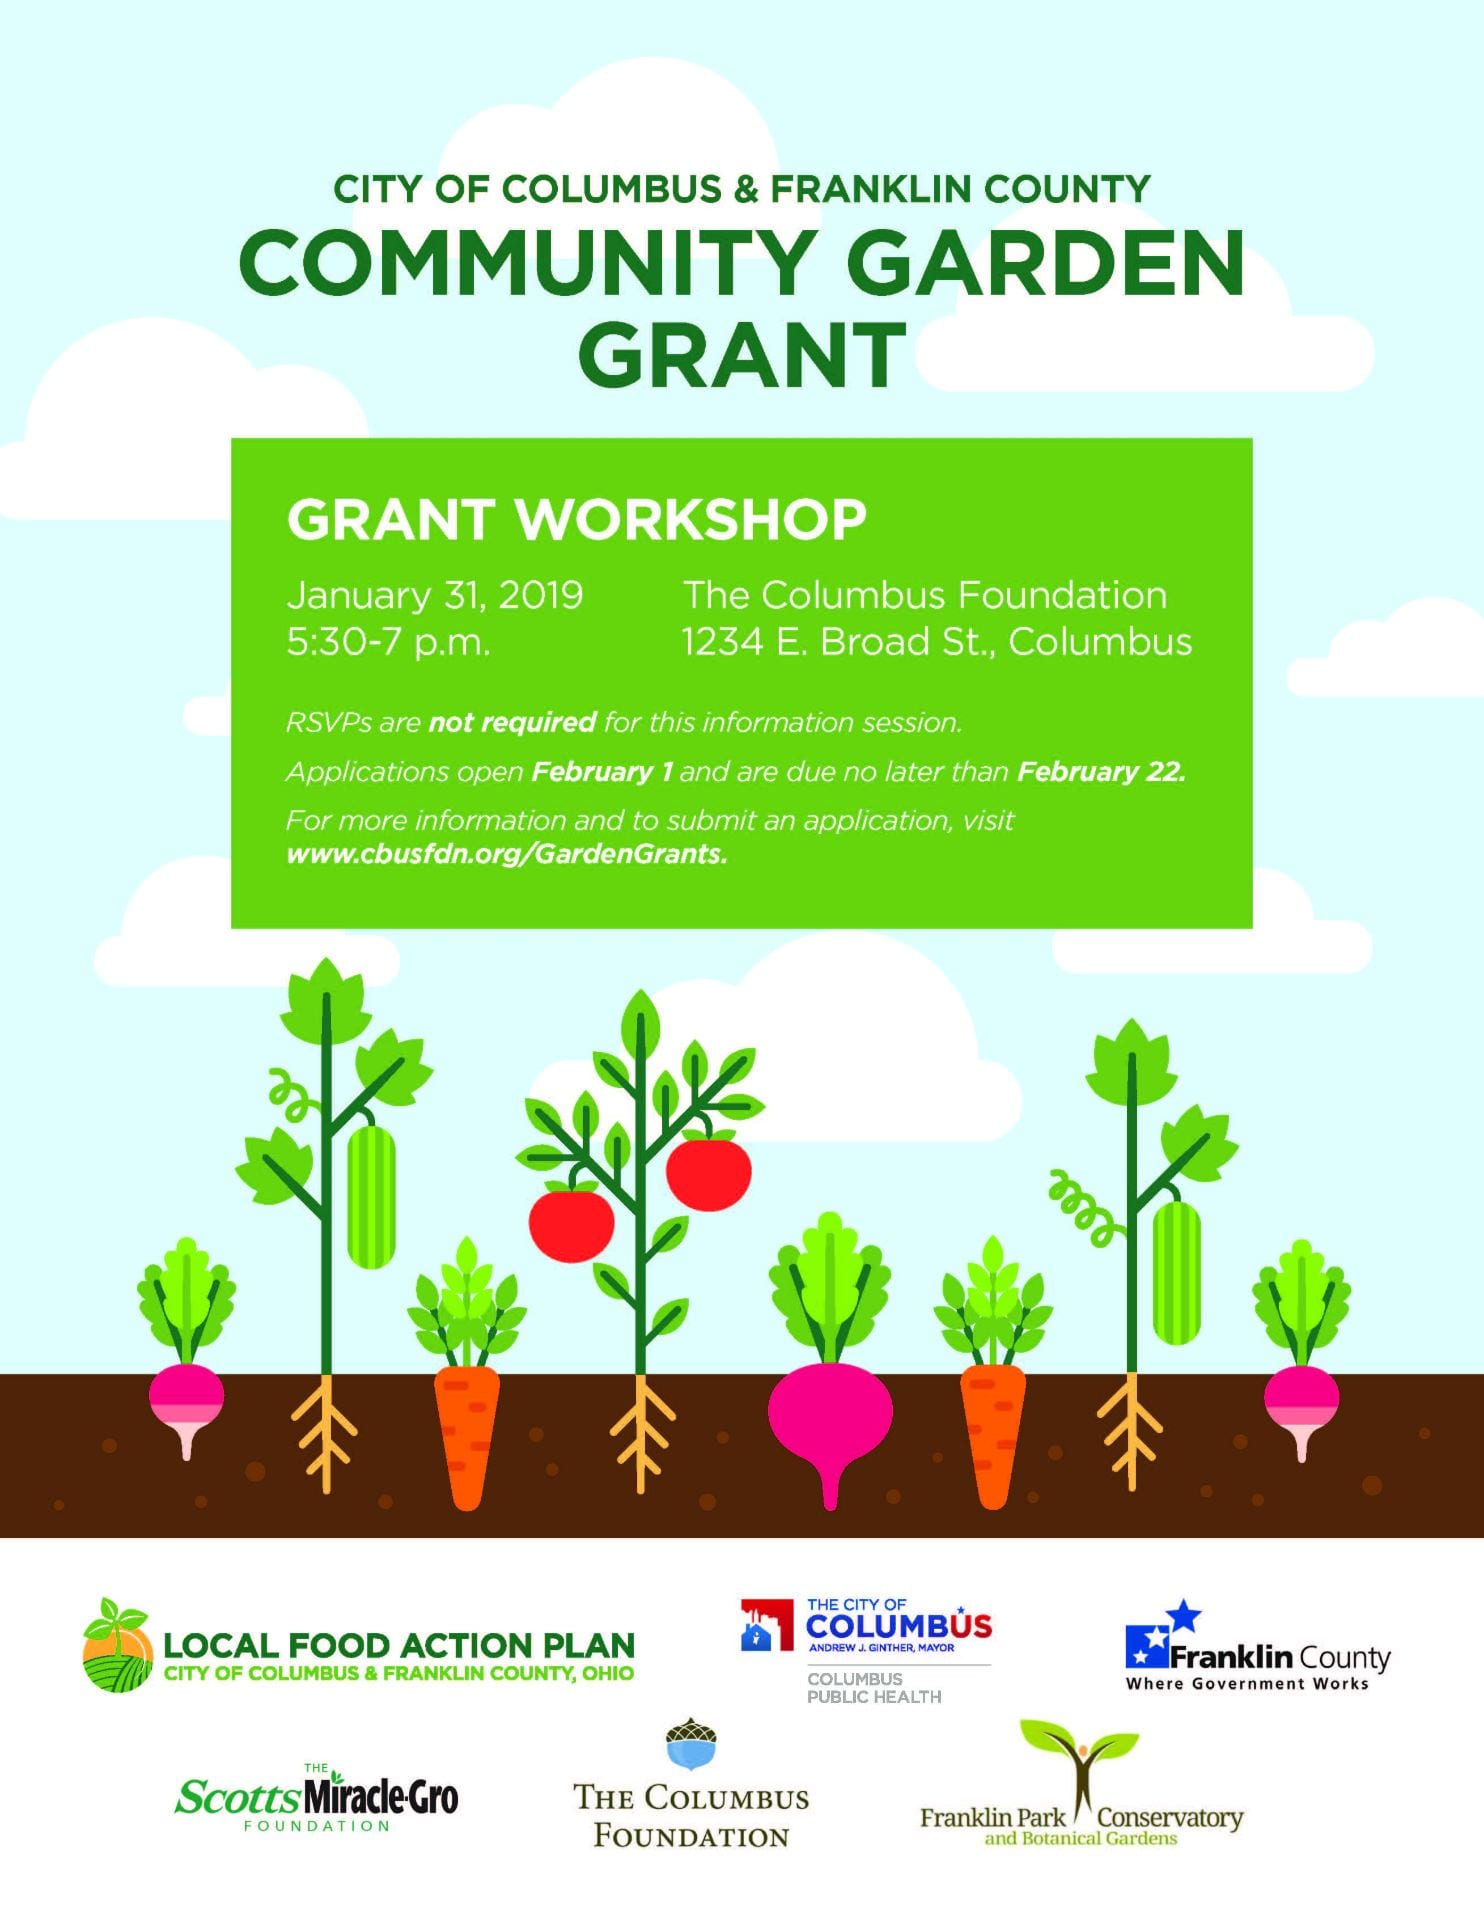 Community Garden Grant Workshop At The Columbus Foundation On